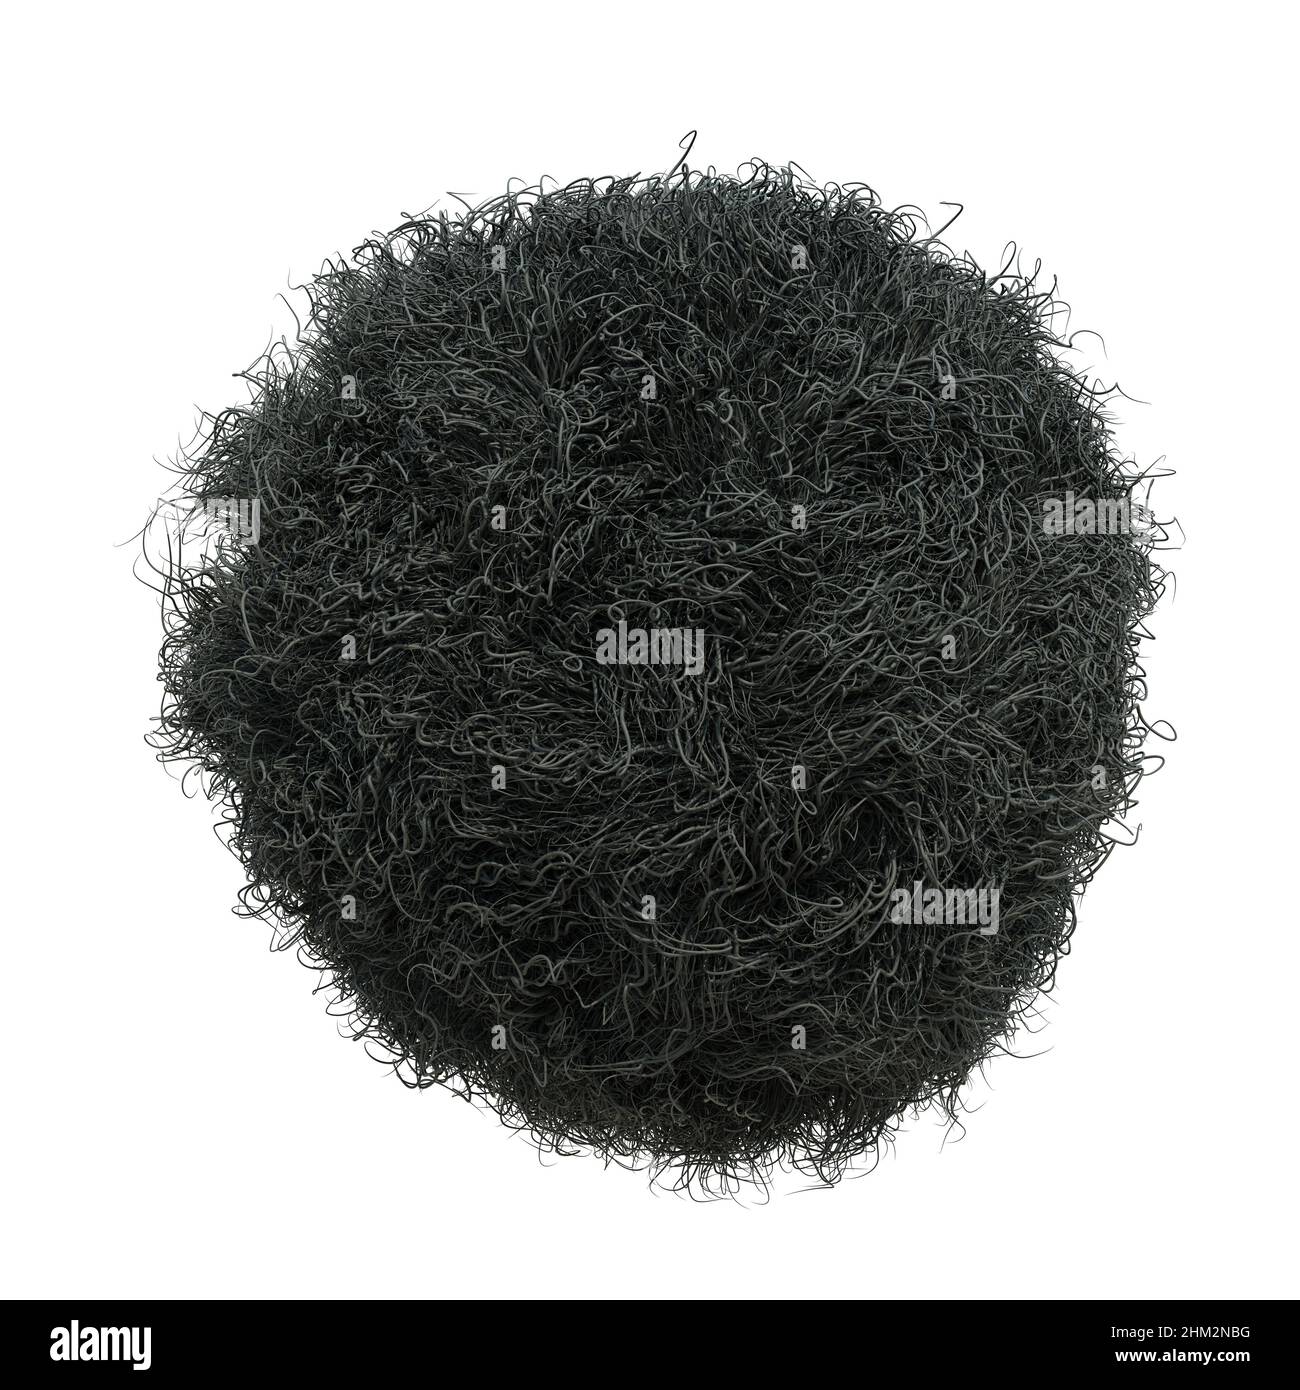 fluffy ball, furry black sphere isolated on white background Stock Photo